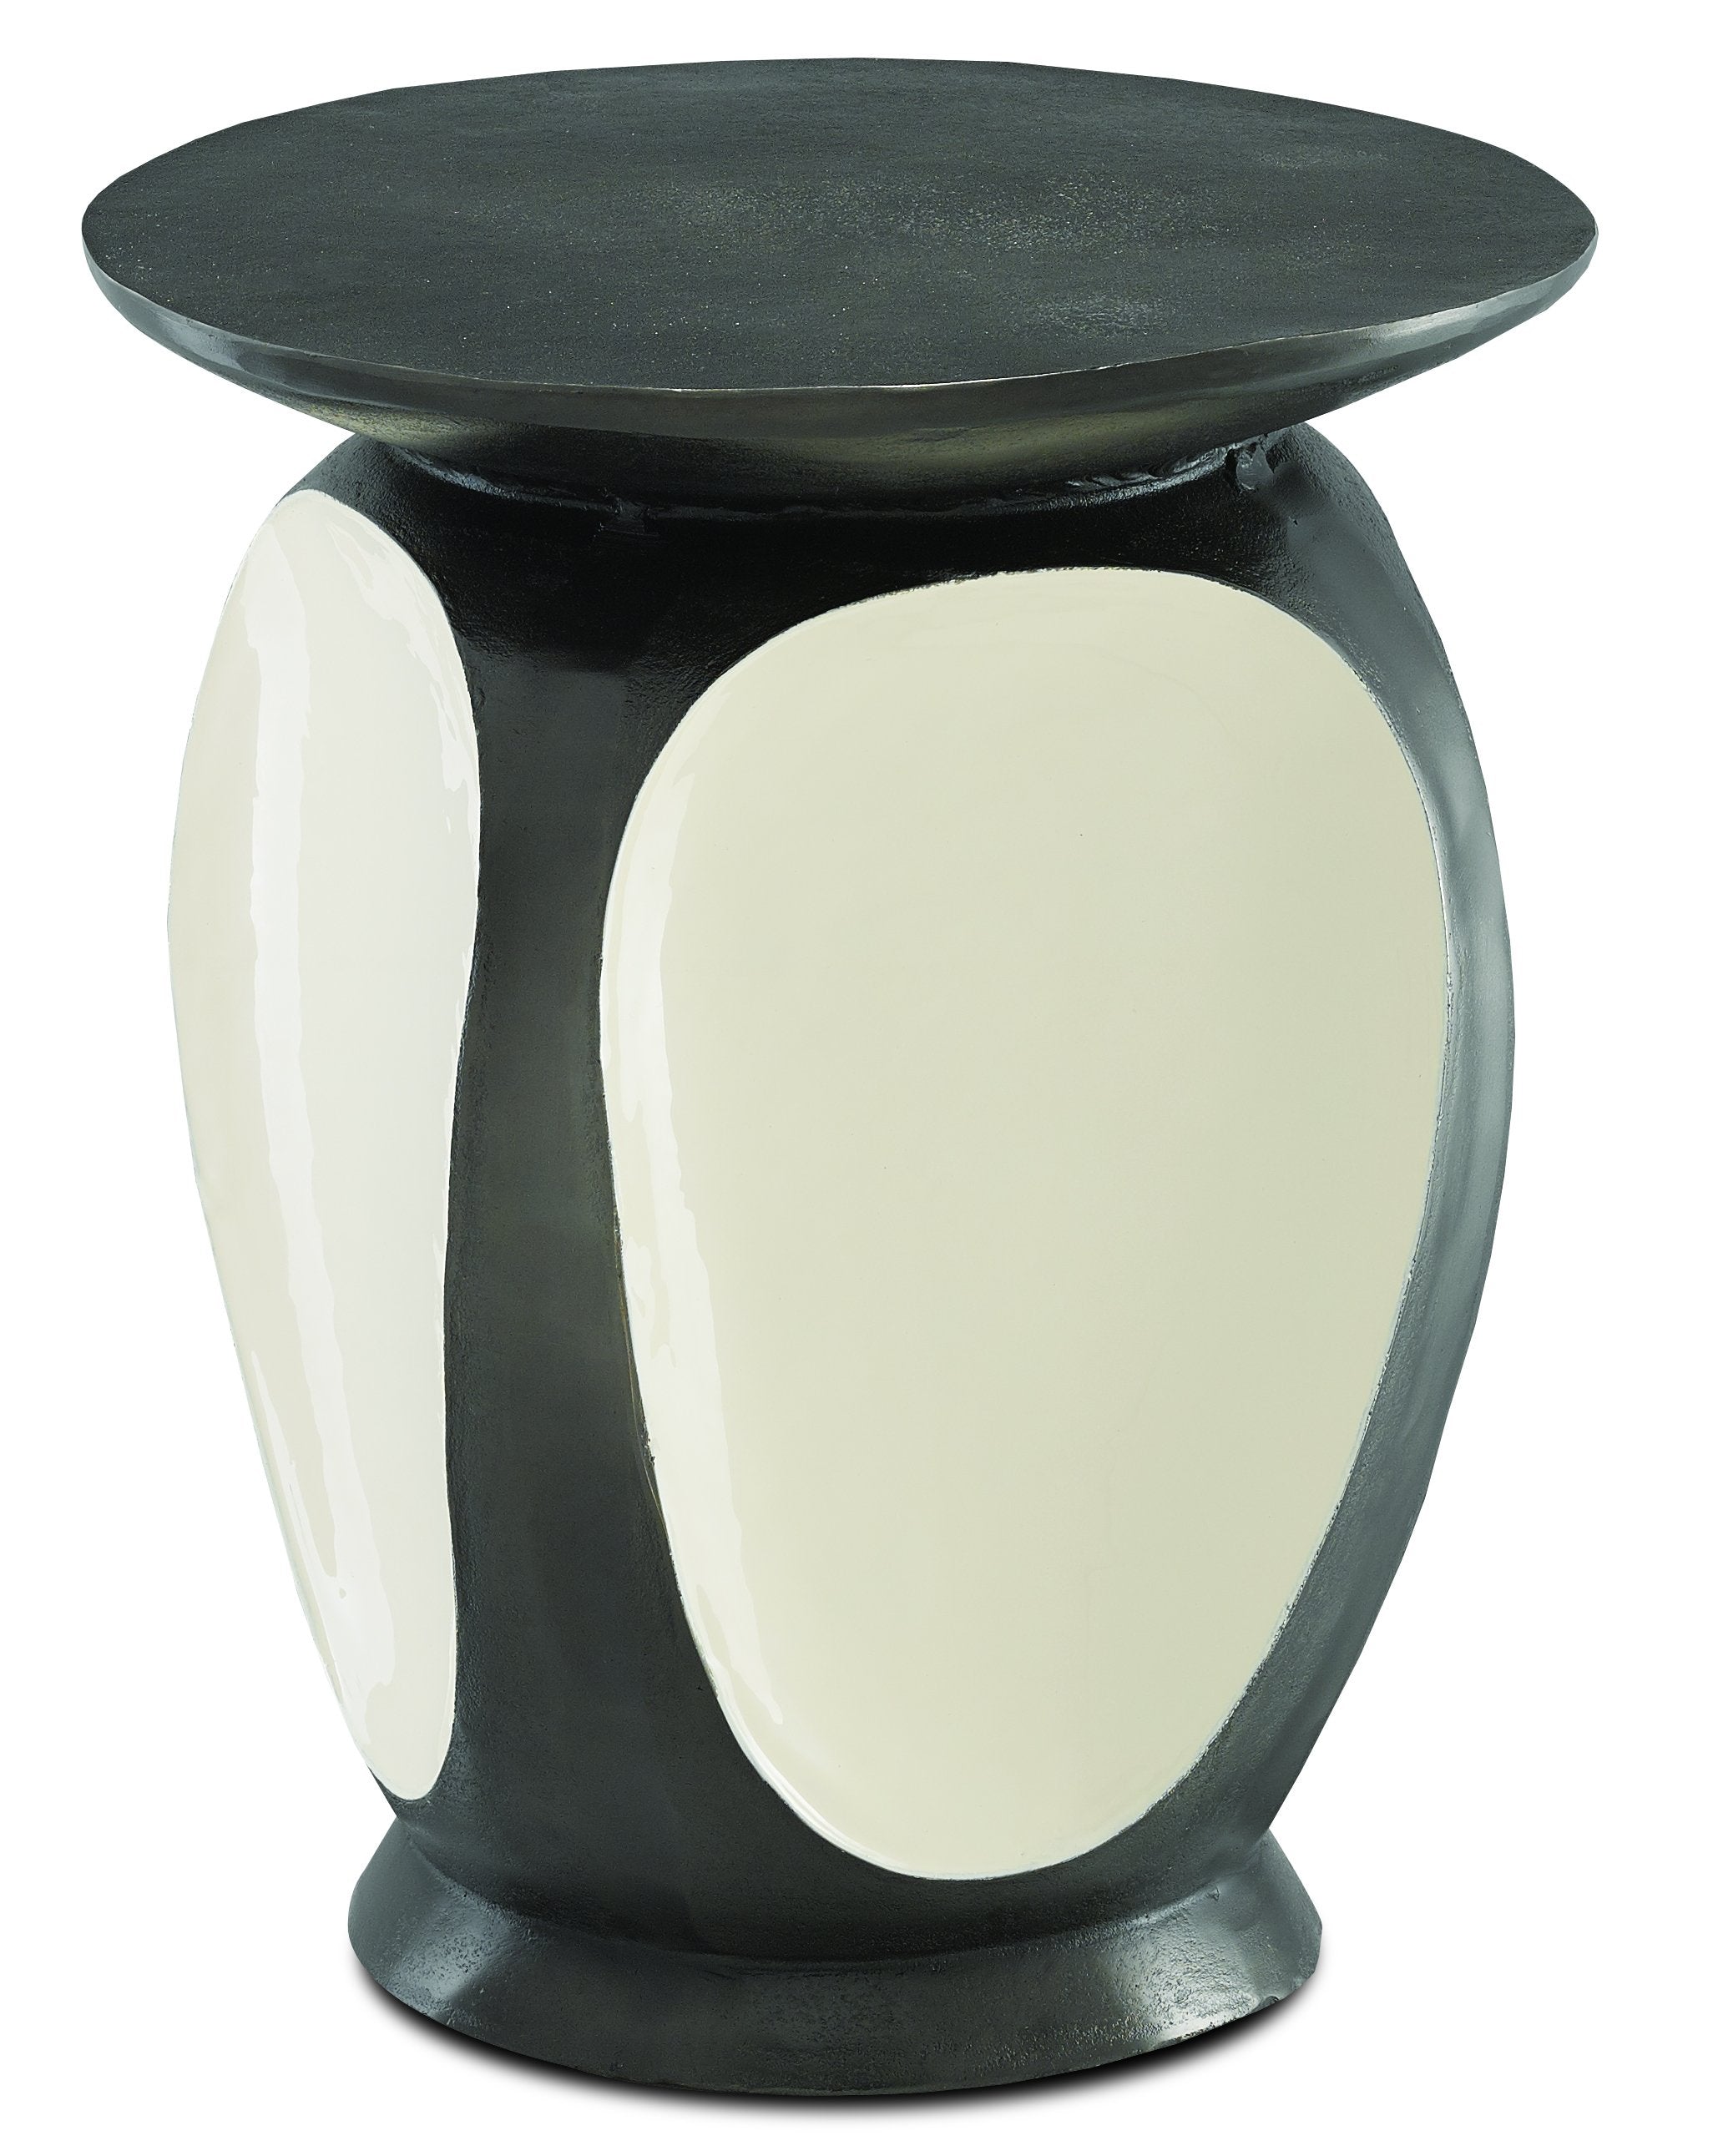 Malmo Graphite Accent Table design by Currey and Company